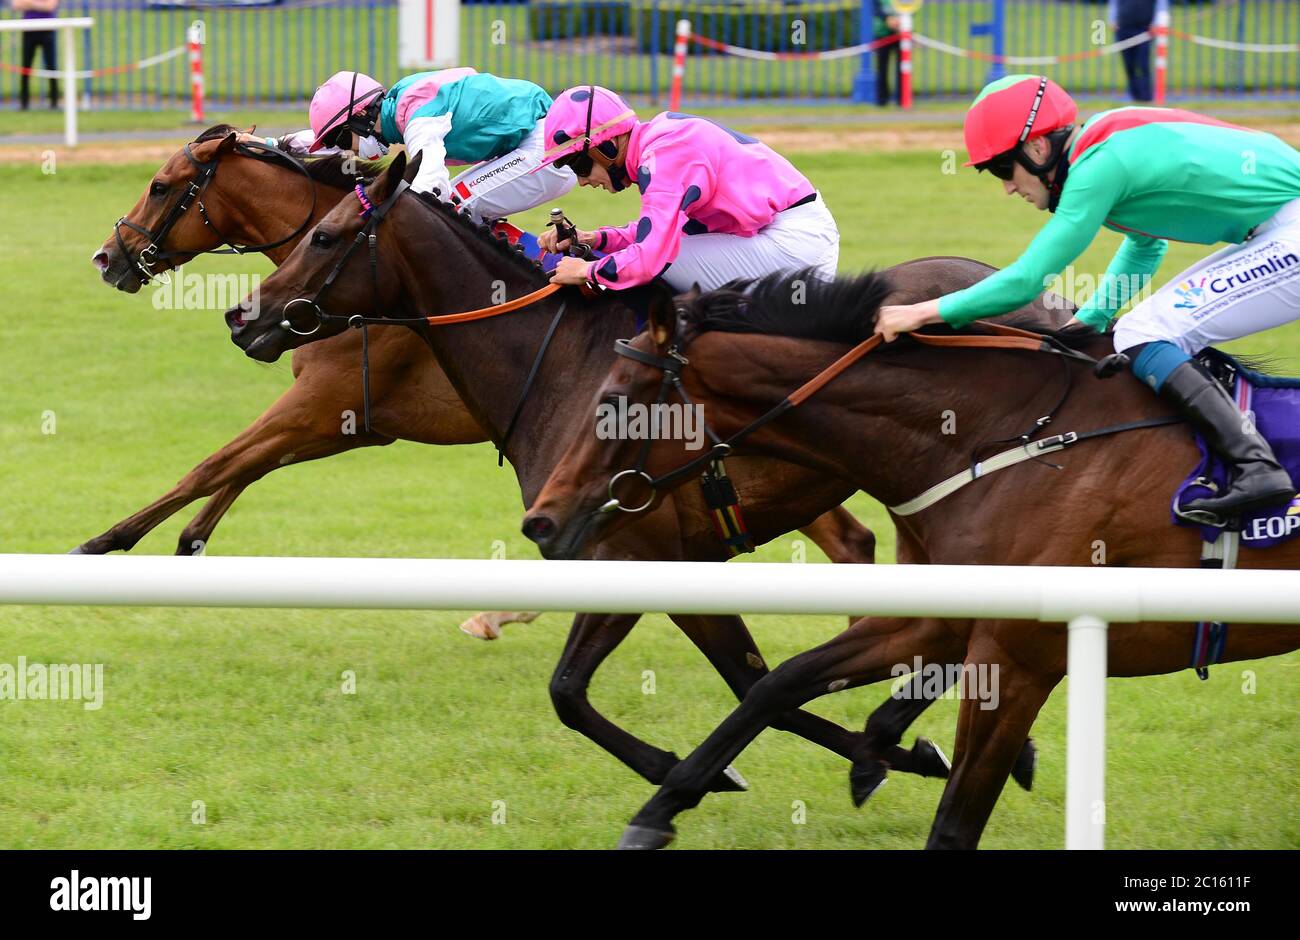 Heliac ridden by Colin Keane (left) beats Fresnel ridden by Ronan Whelan and Loveisthehigherlaw ridden by Billy Lee (right) to win the Irish Stallion Farms EBF Noblesse Stakes at Leopardstown Racecourse. Stock Photo